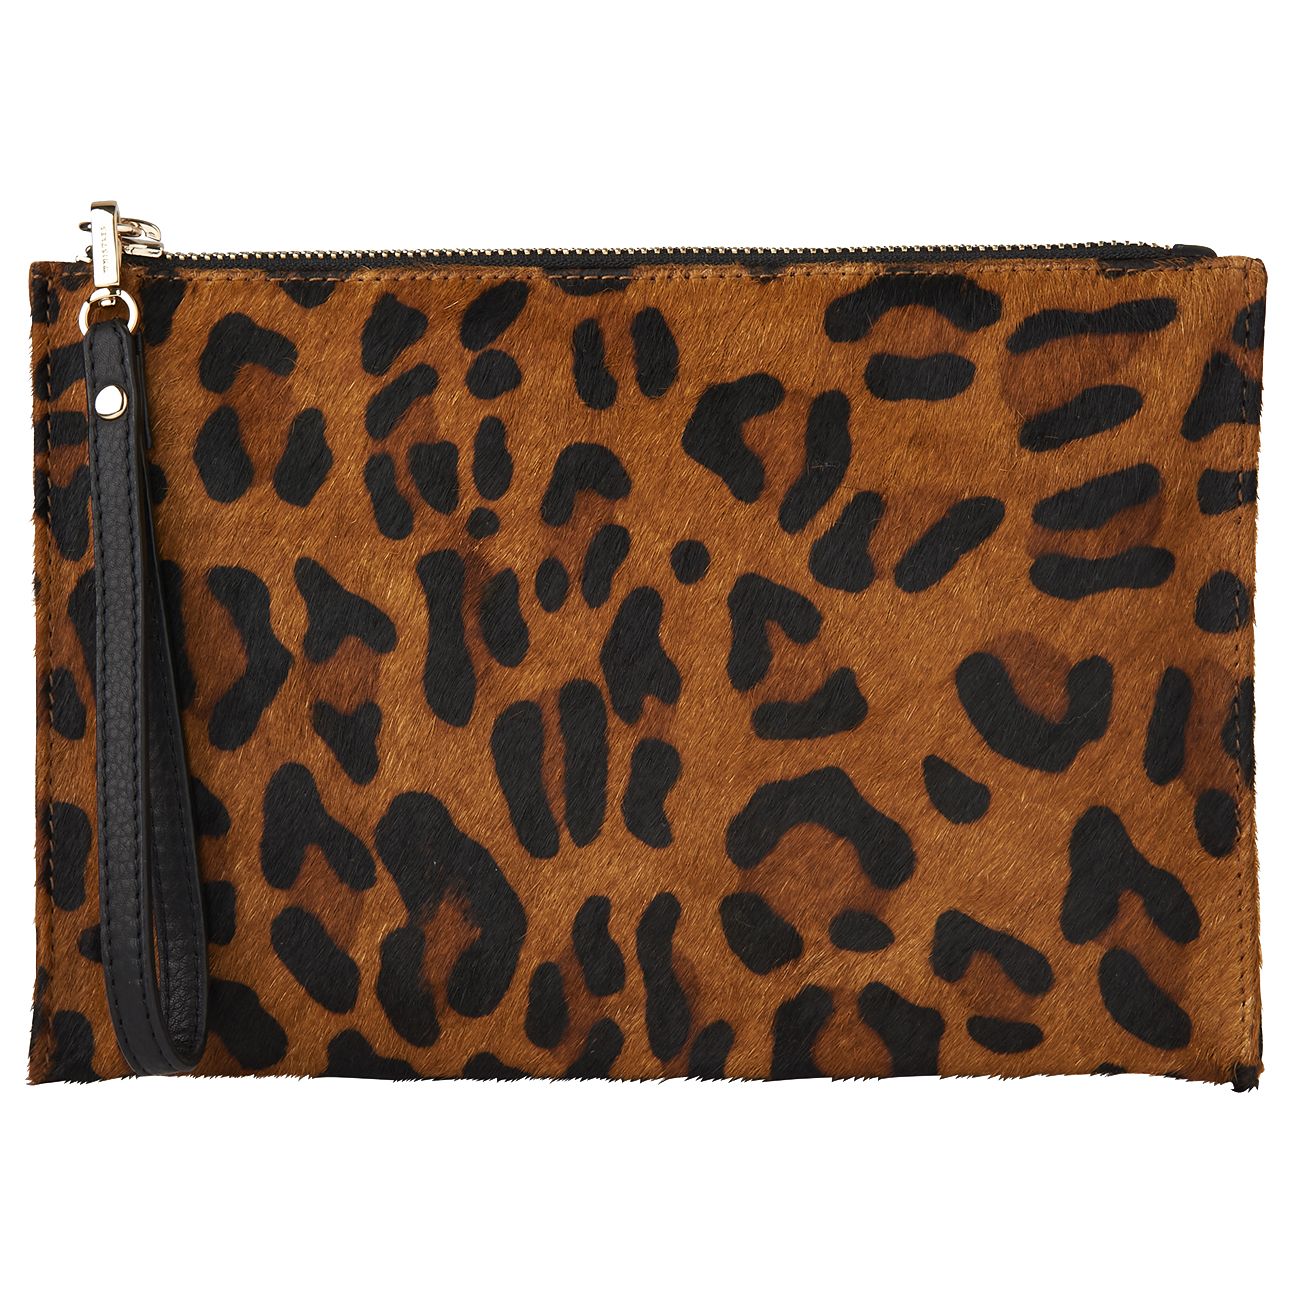 Whistles Leopard Print Wristlet Purse Multi At John Lewis And Partners 6332